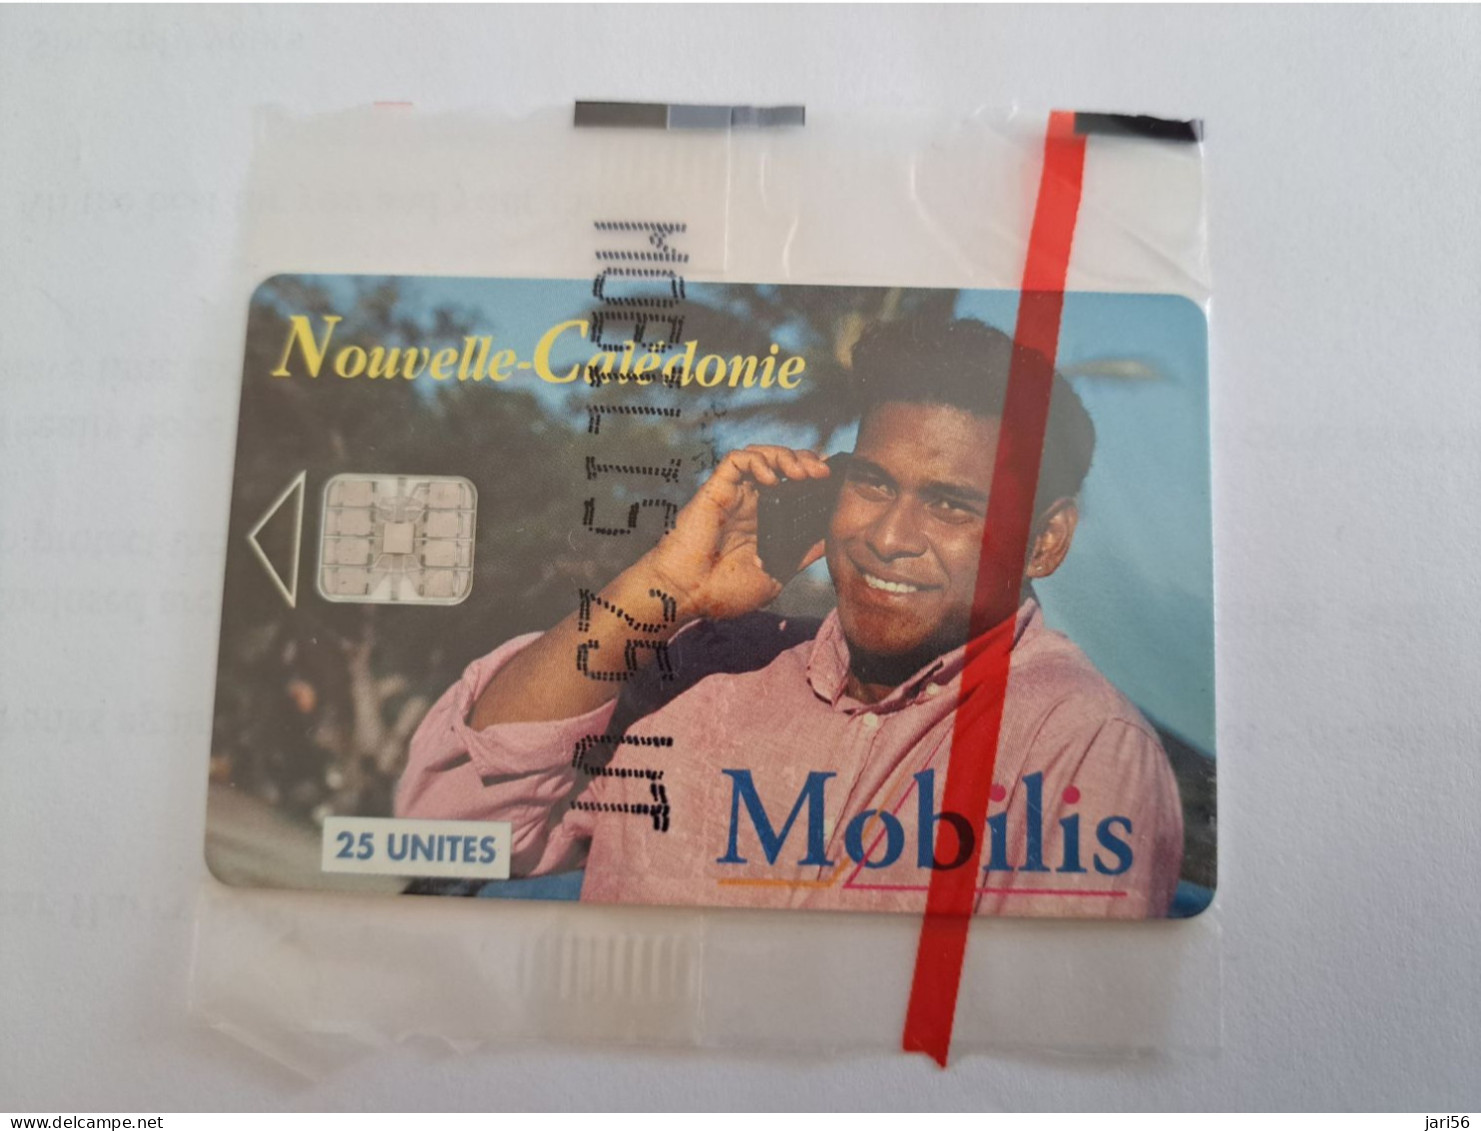 NOUVELLE CALEDONIA  CHIP CARD 25  UNITS / MAN ON THE PHONE /MOBILIS   / MINT IN WRAPPER  ** 13546 ** - New Caledonia